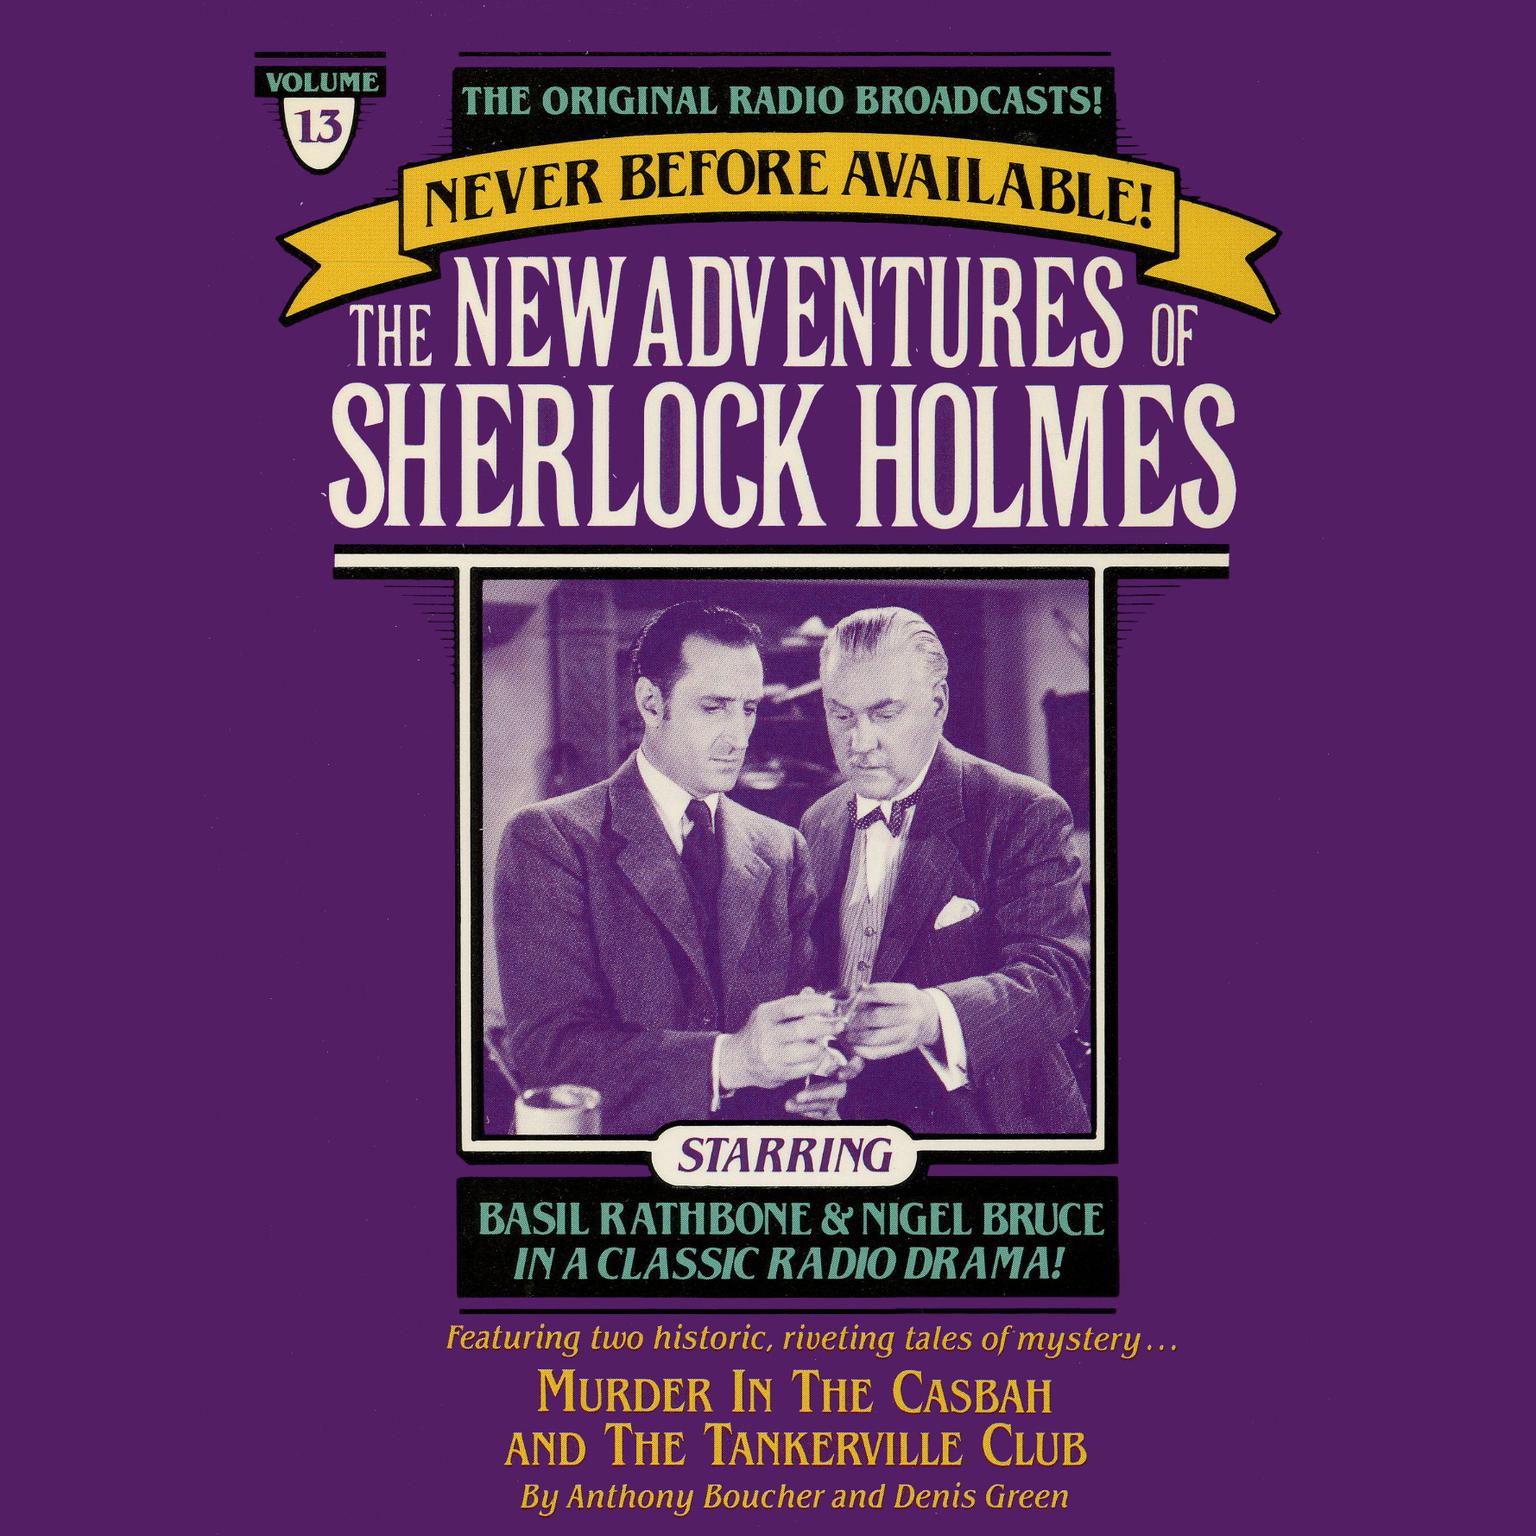 Murder in the Casbah and The Tankerville Club (Abridged): The New Adventures of Sherlock Holmes, Episode 13 Audiobook, by Anthony Boucher